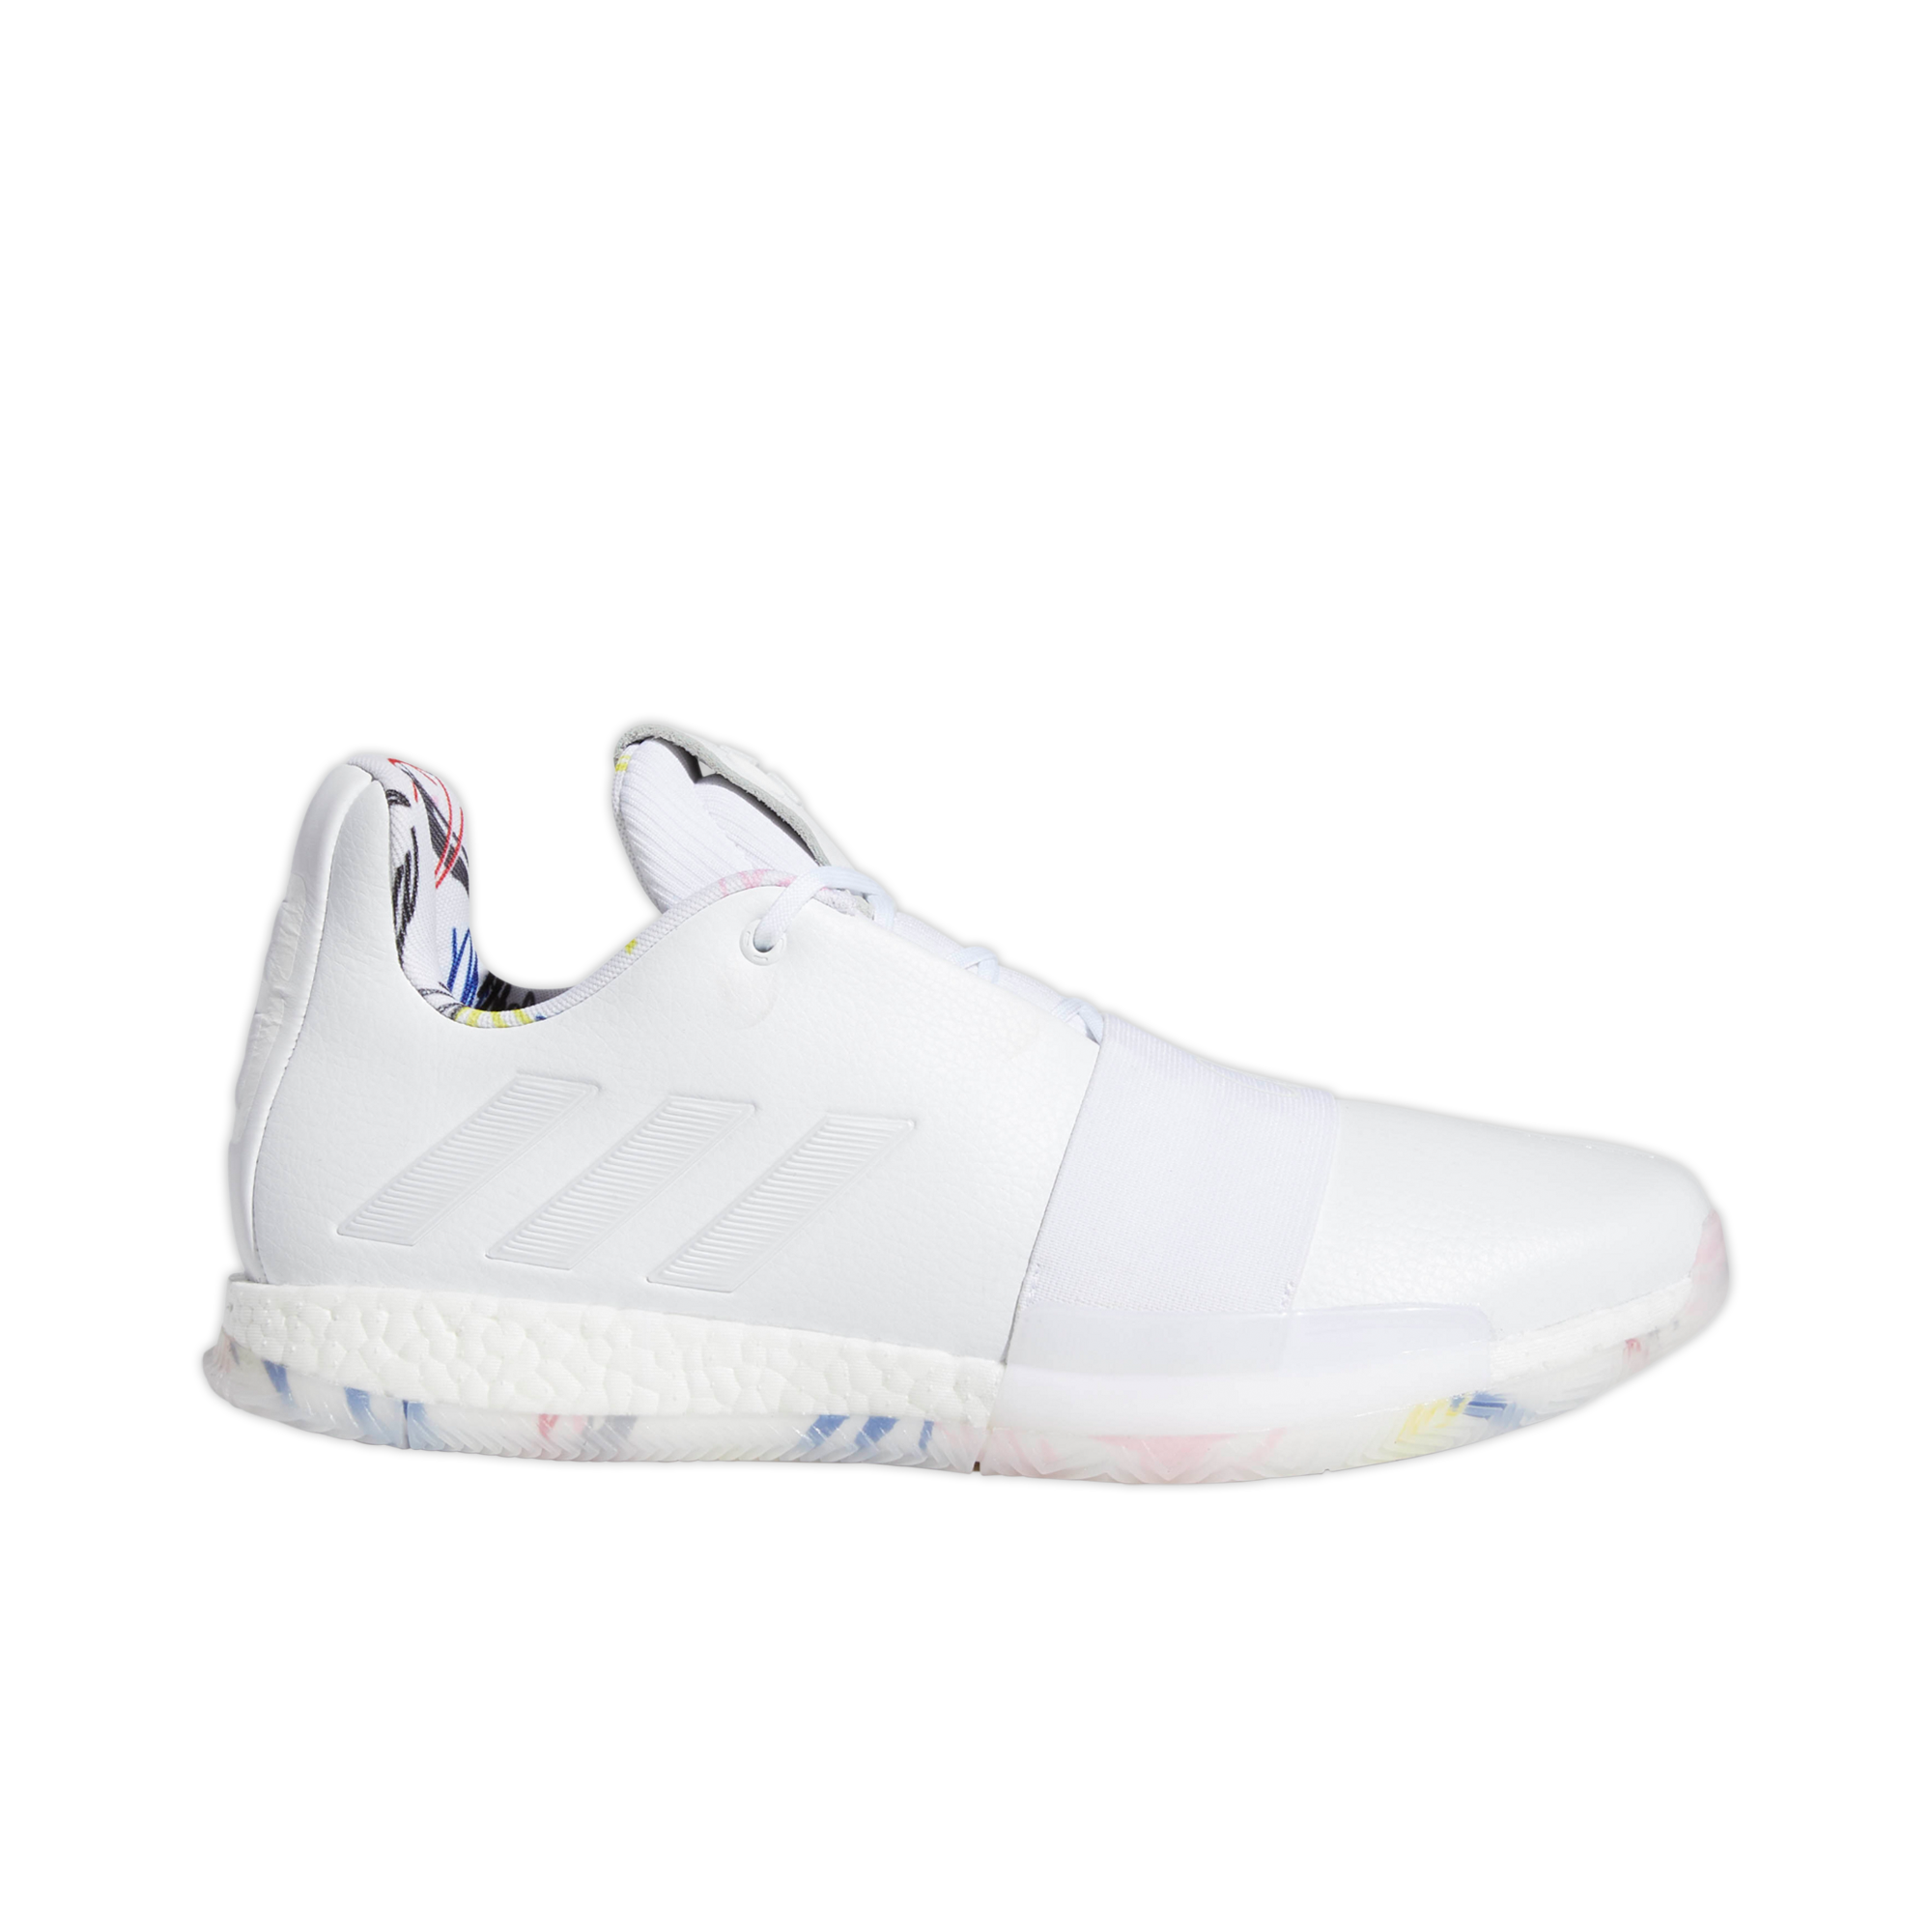 james harden shoes all white